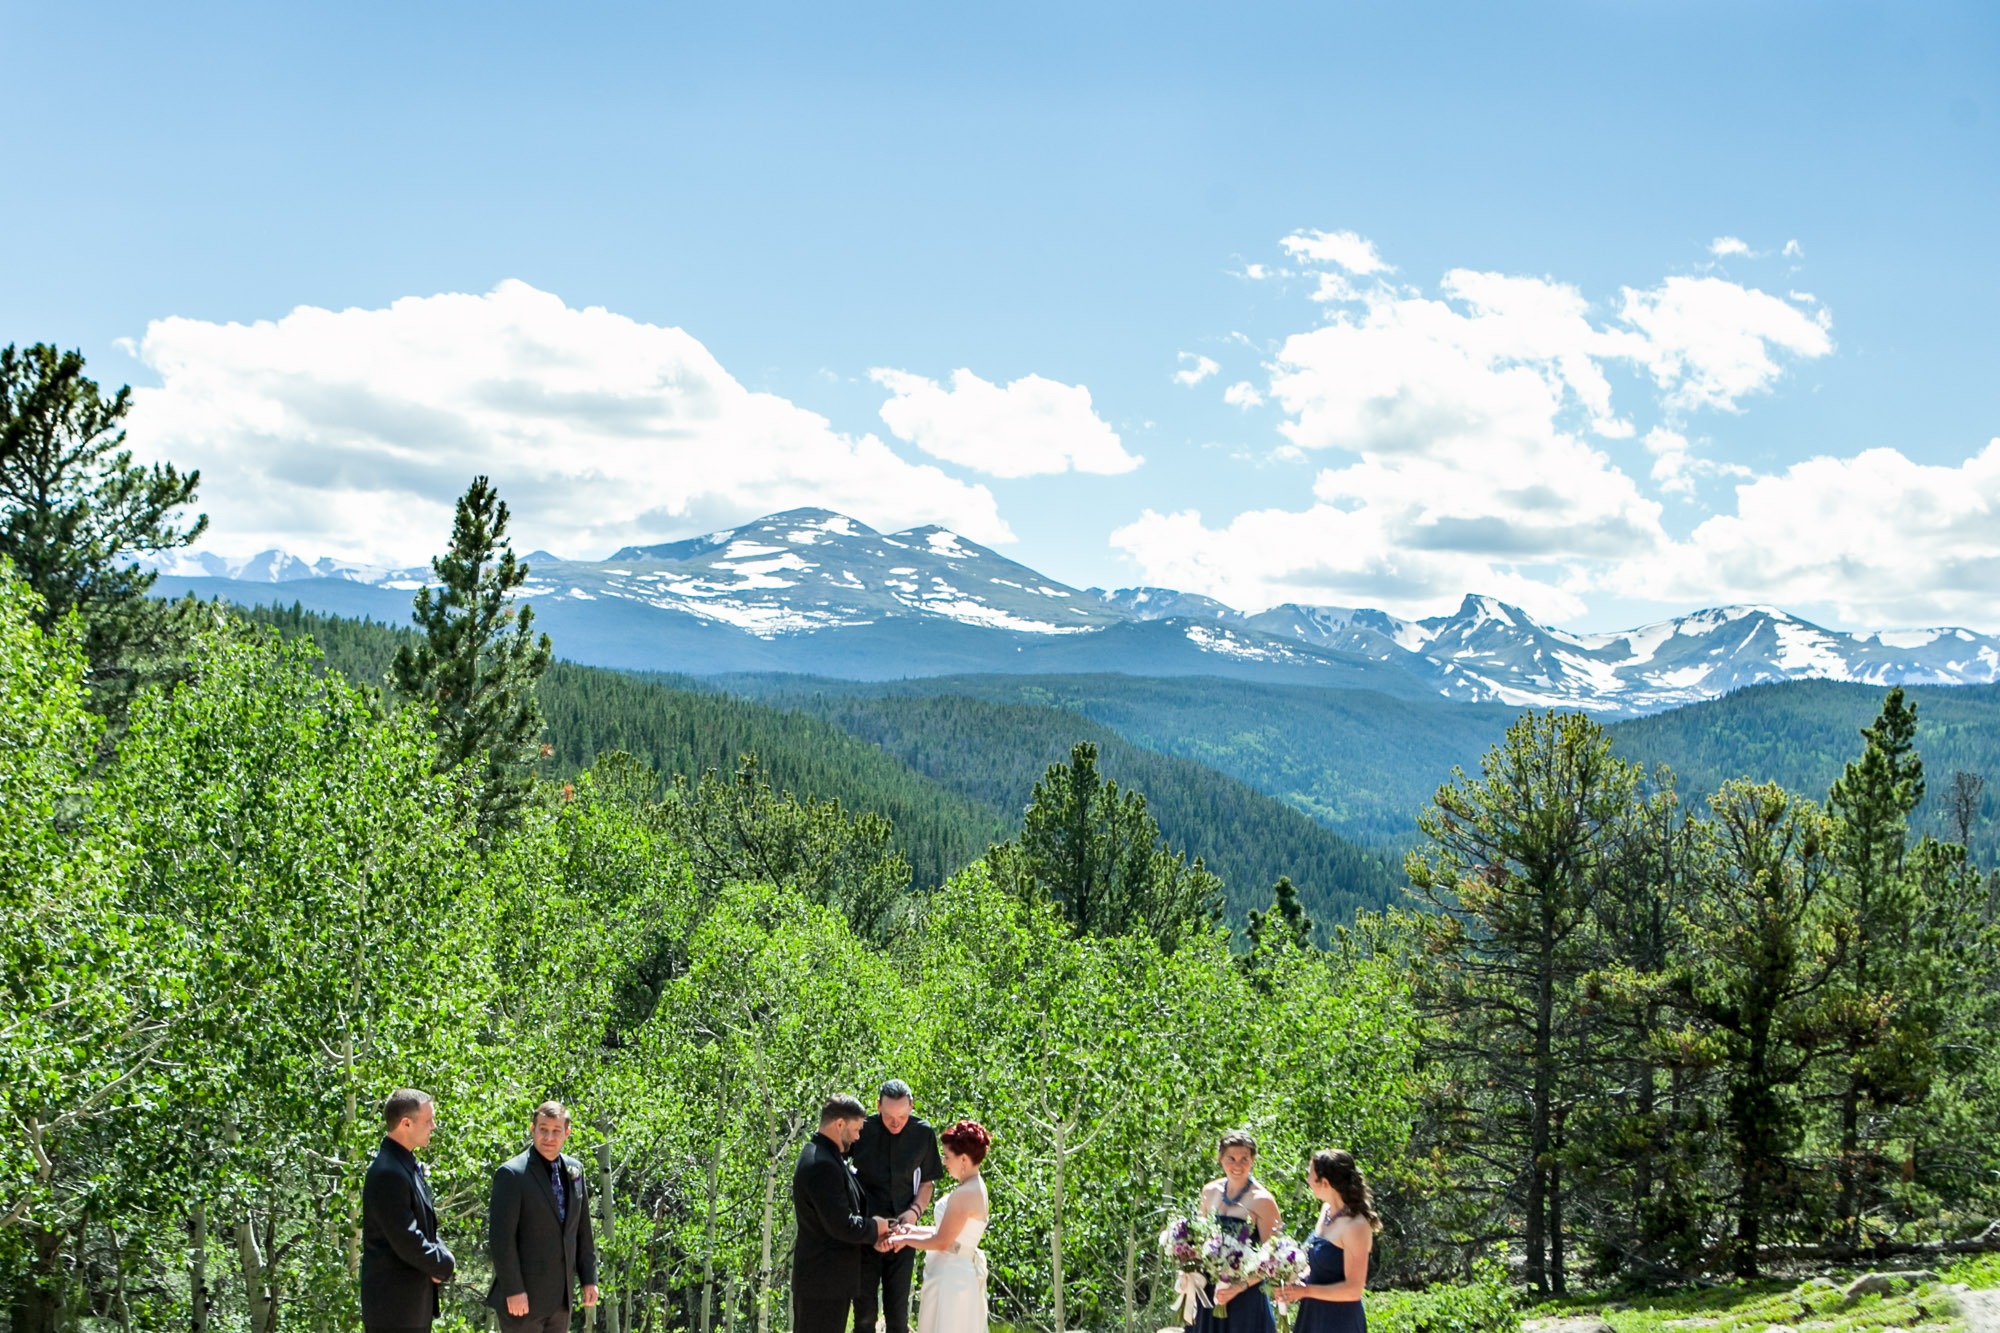 a wedding ceremony takes place in front of snow-capped mountains and blue skies with white clouds